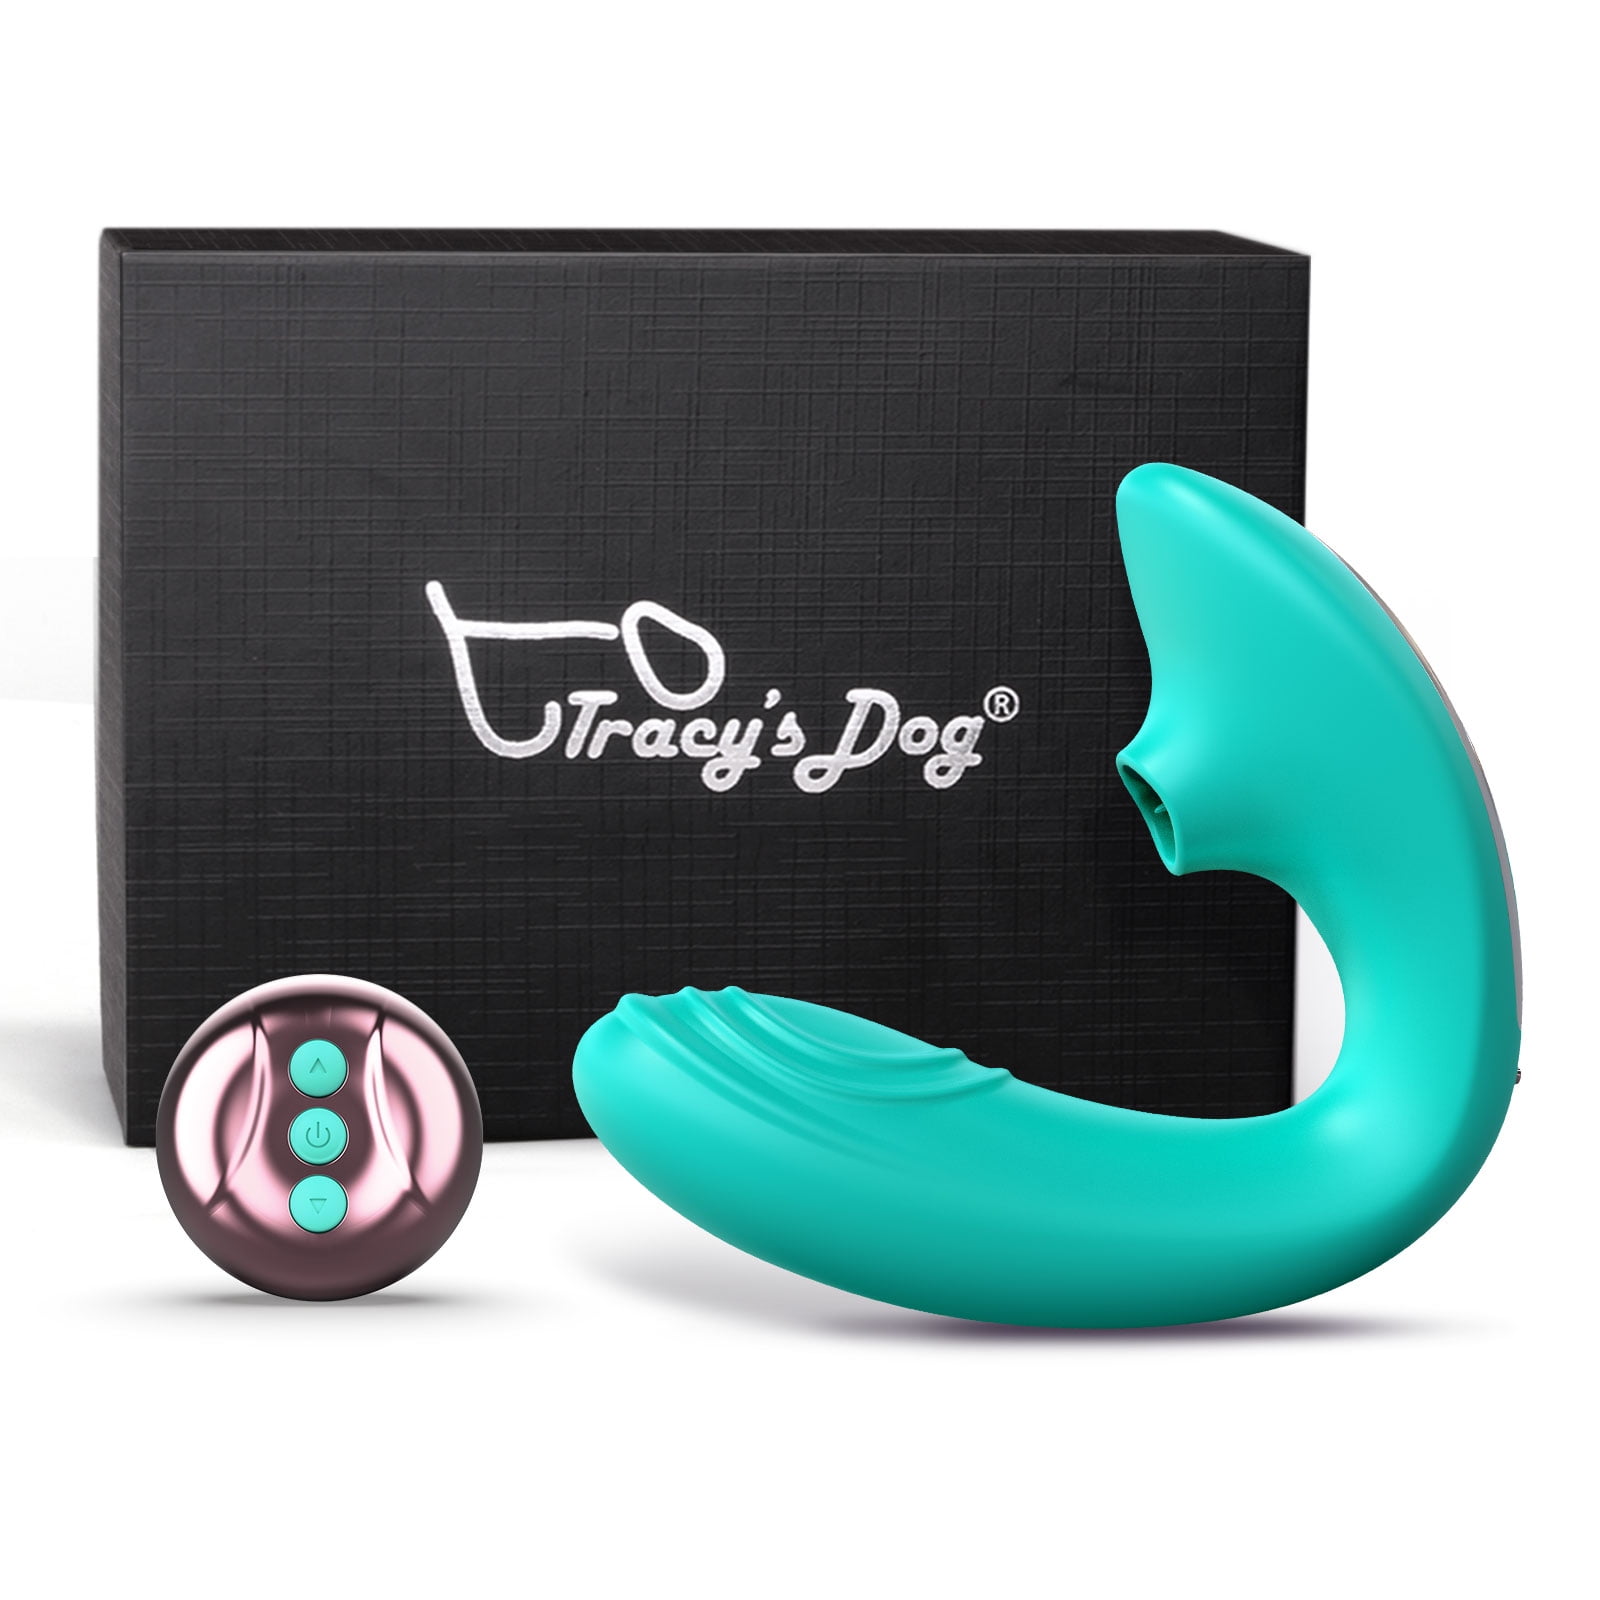 Tracys Dog Clitoral Vibrator Remote Control for G Spot Stimulation with 10 Pulsation and 7 Licking Modes, Adult Sex Toys for Women Solo Play, Teal